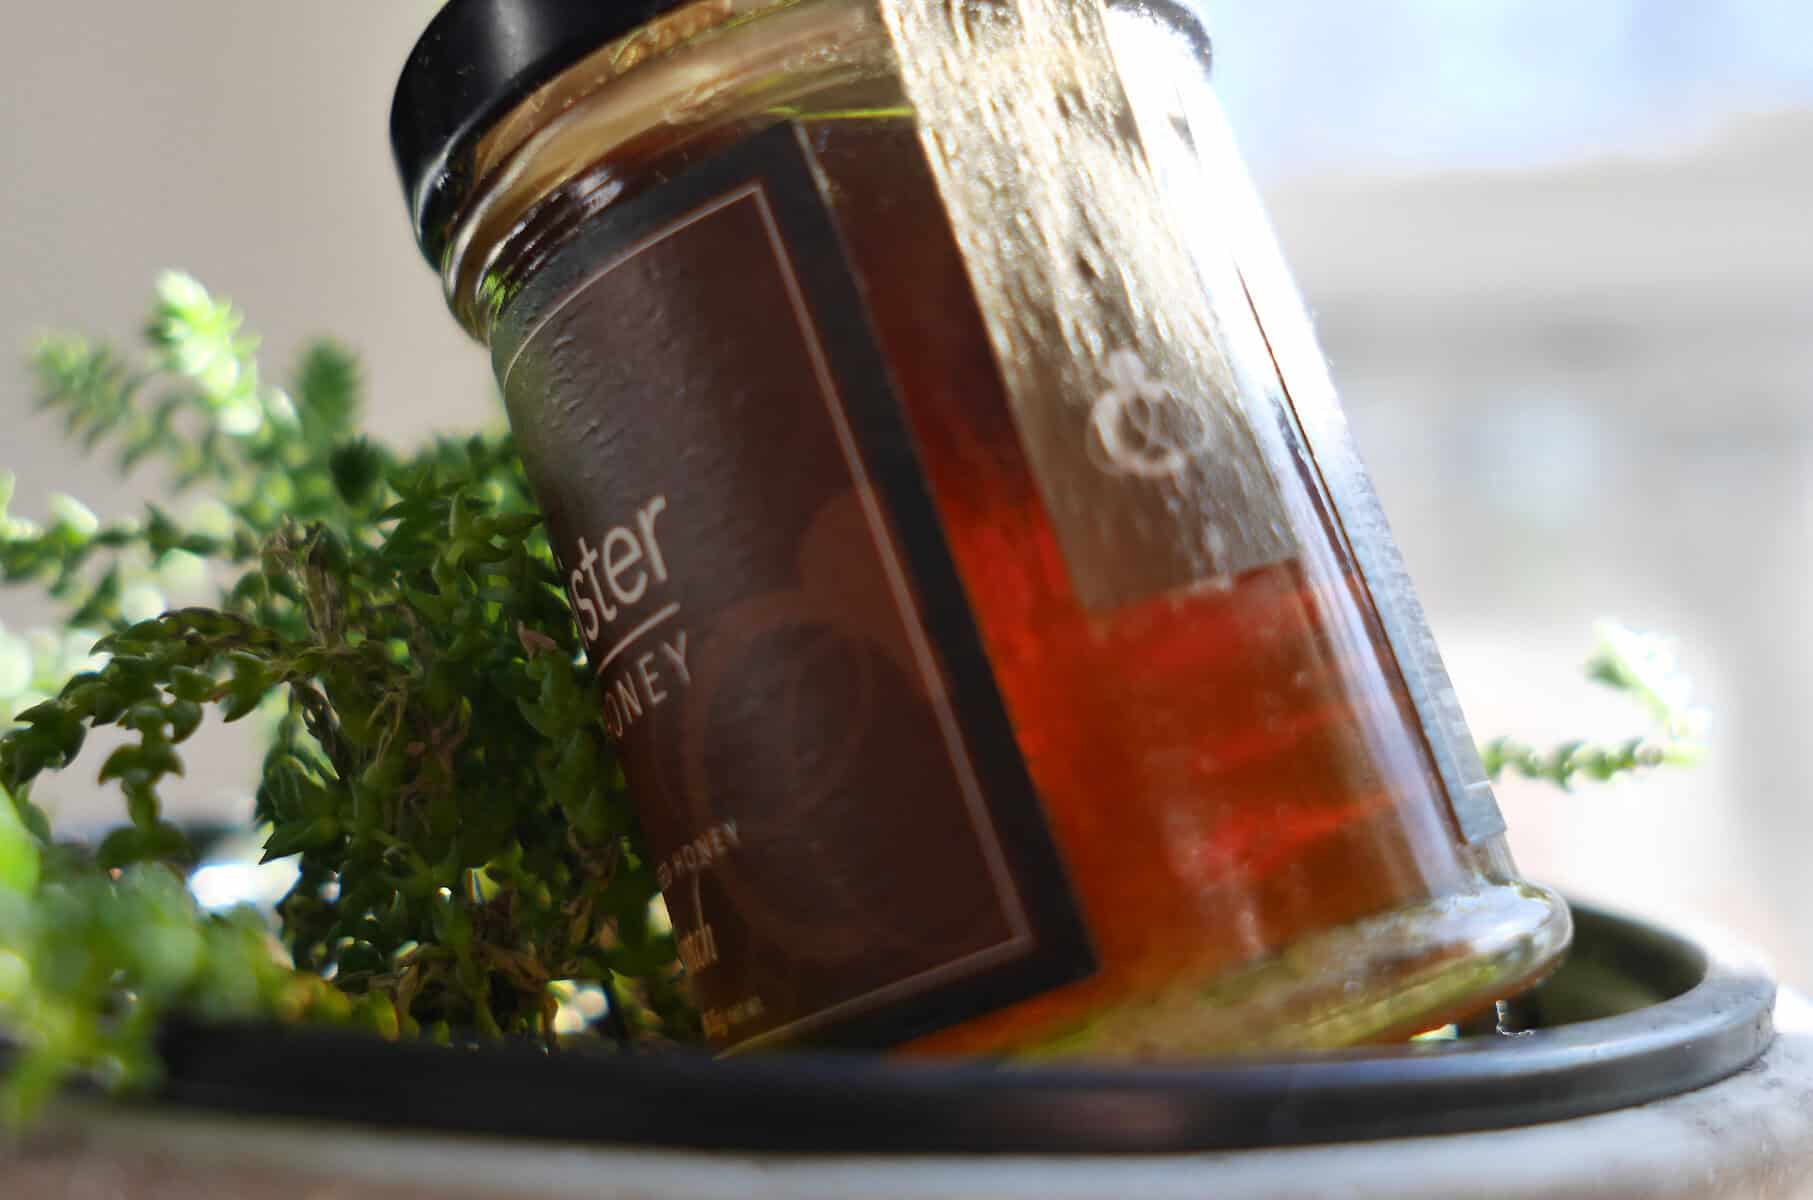 Cloister Infused Scotch Honey